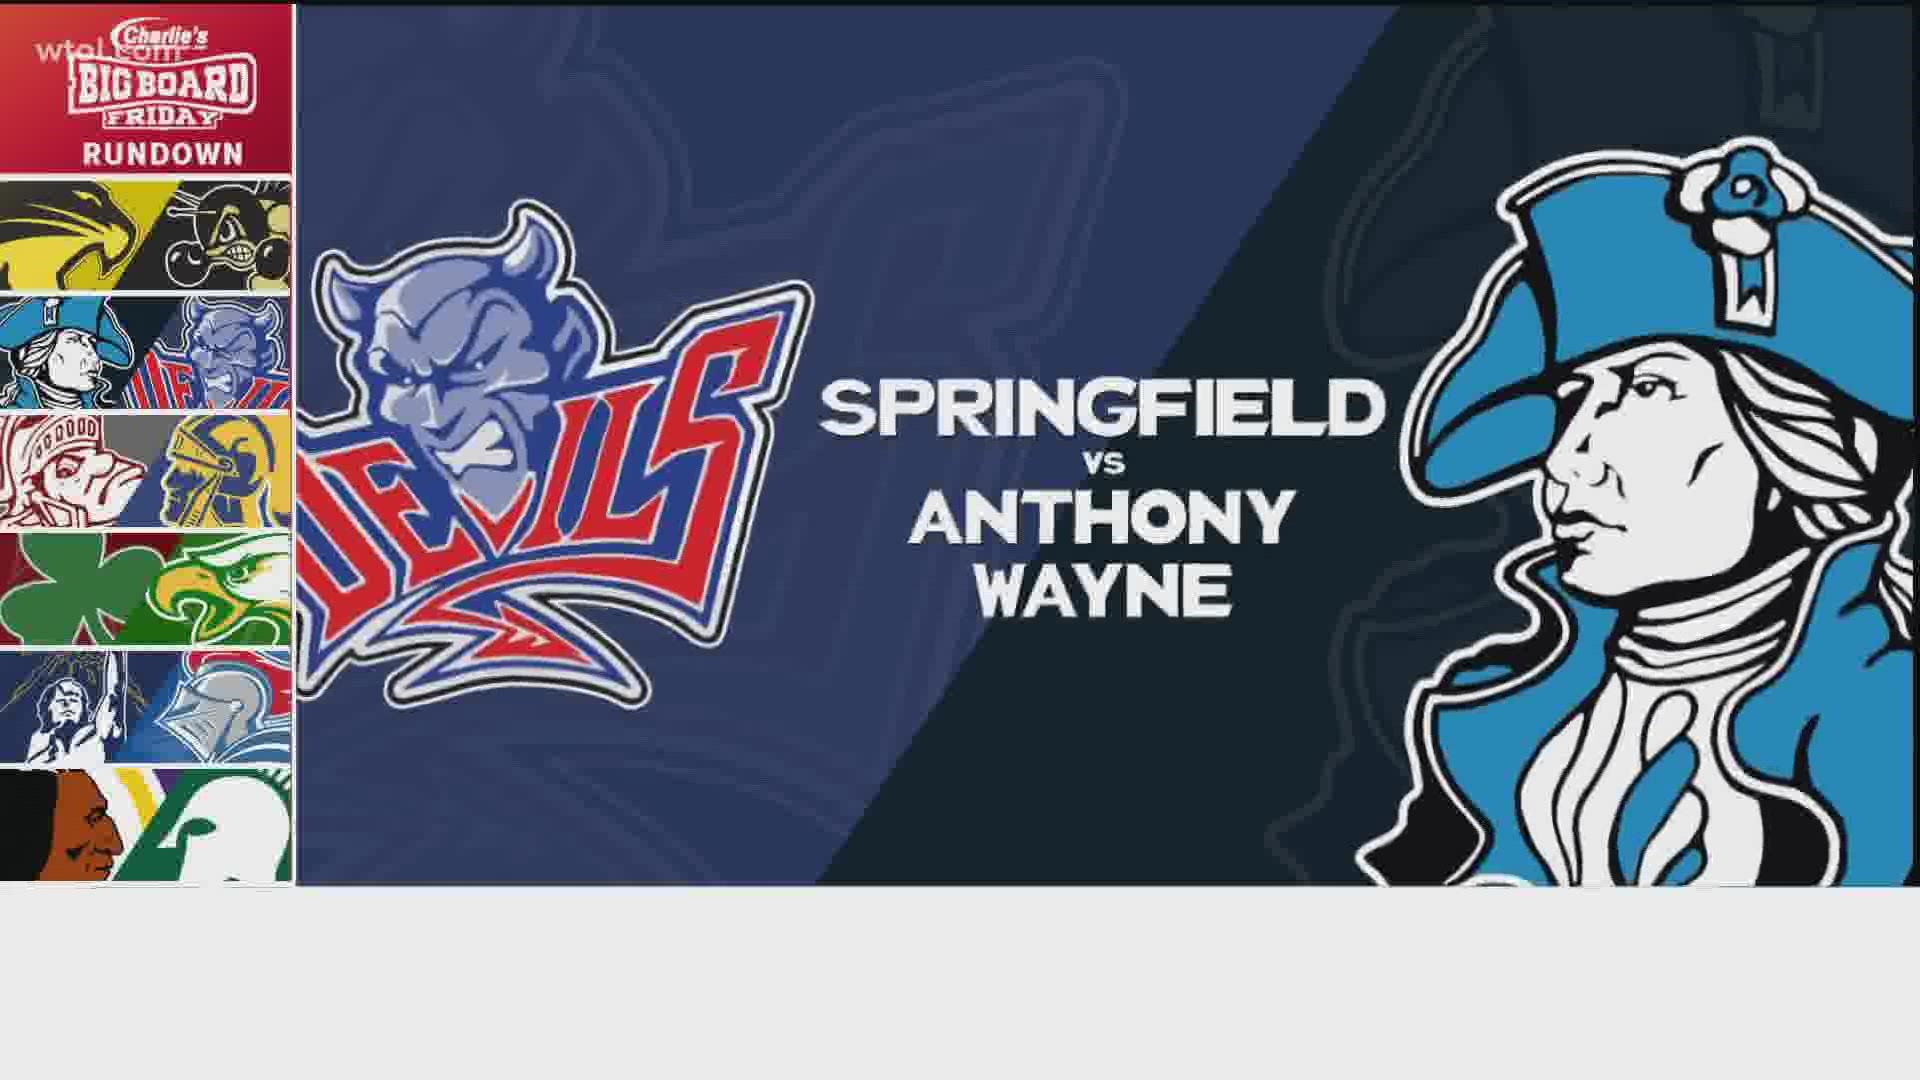 Springfield still looking for their first league win, at home with Anthony Wayne.